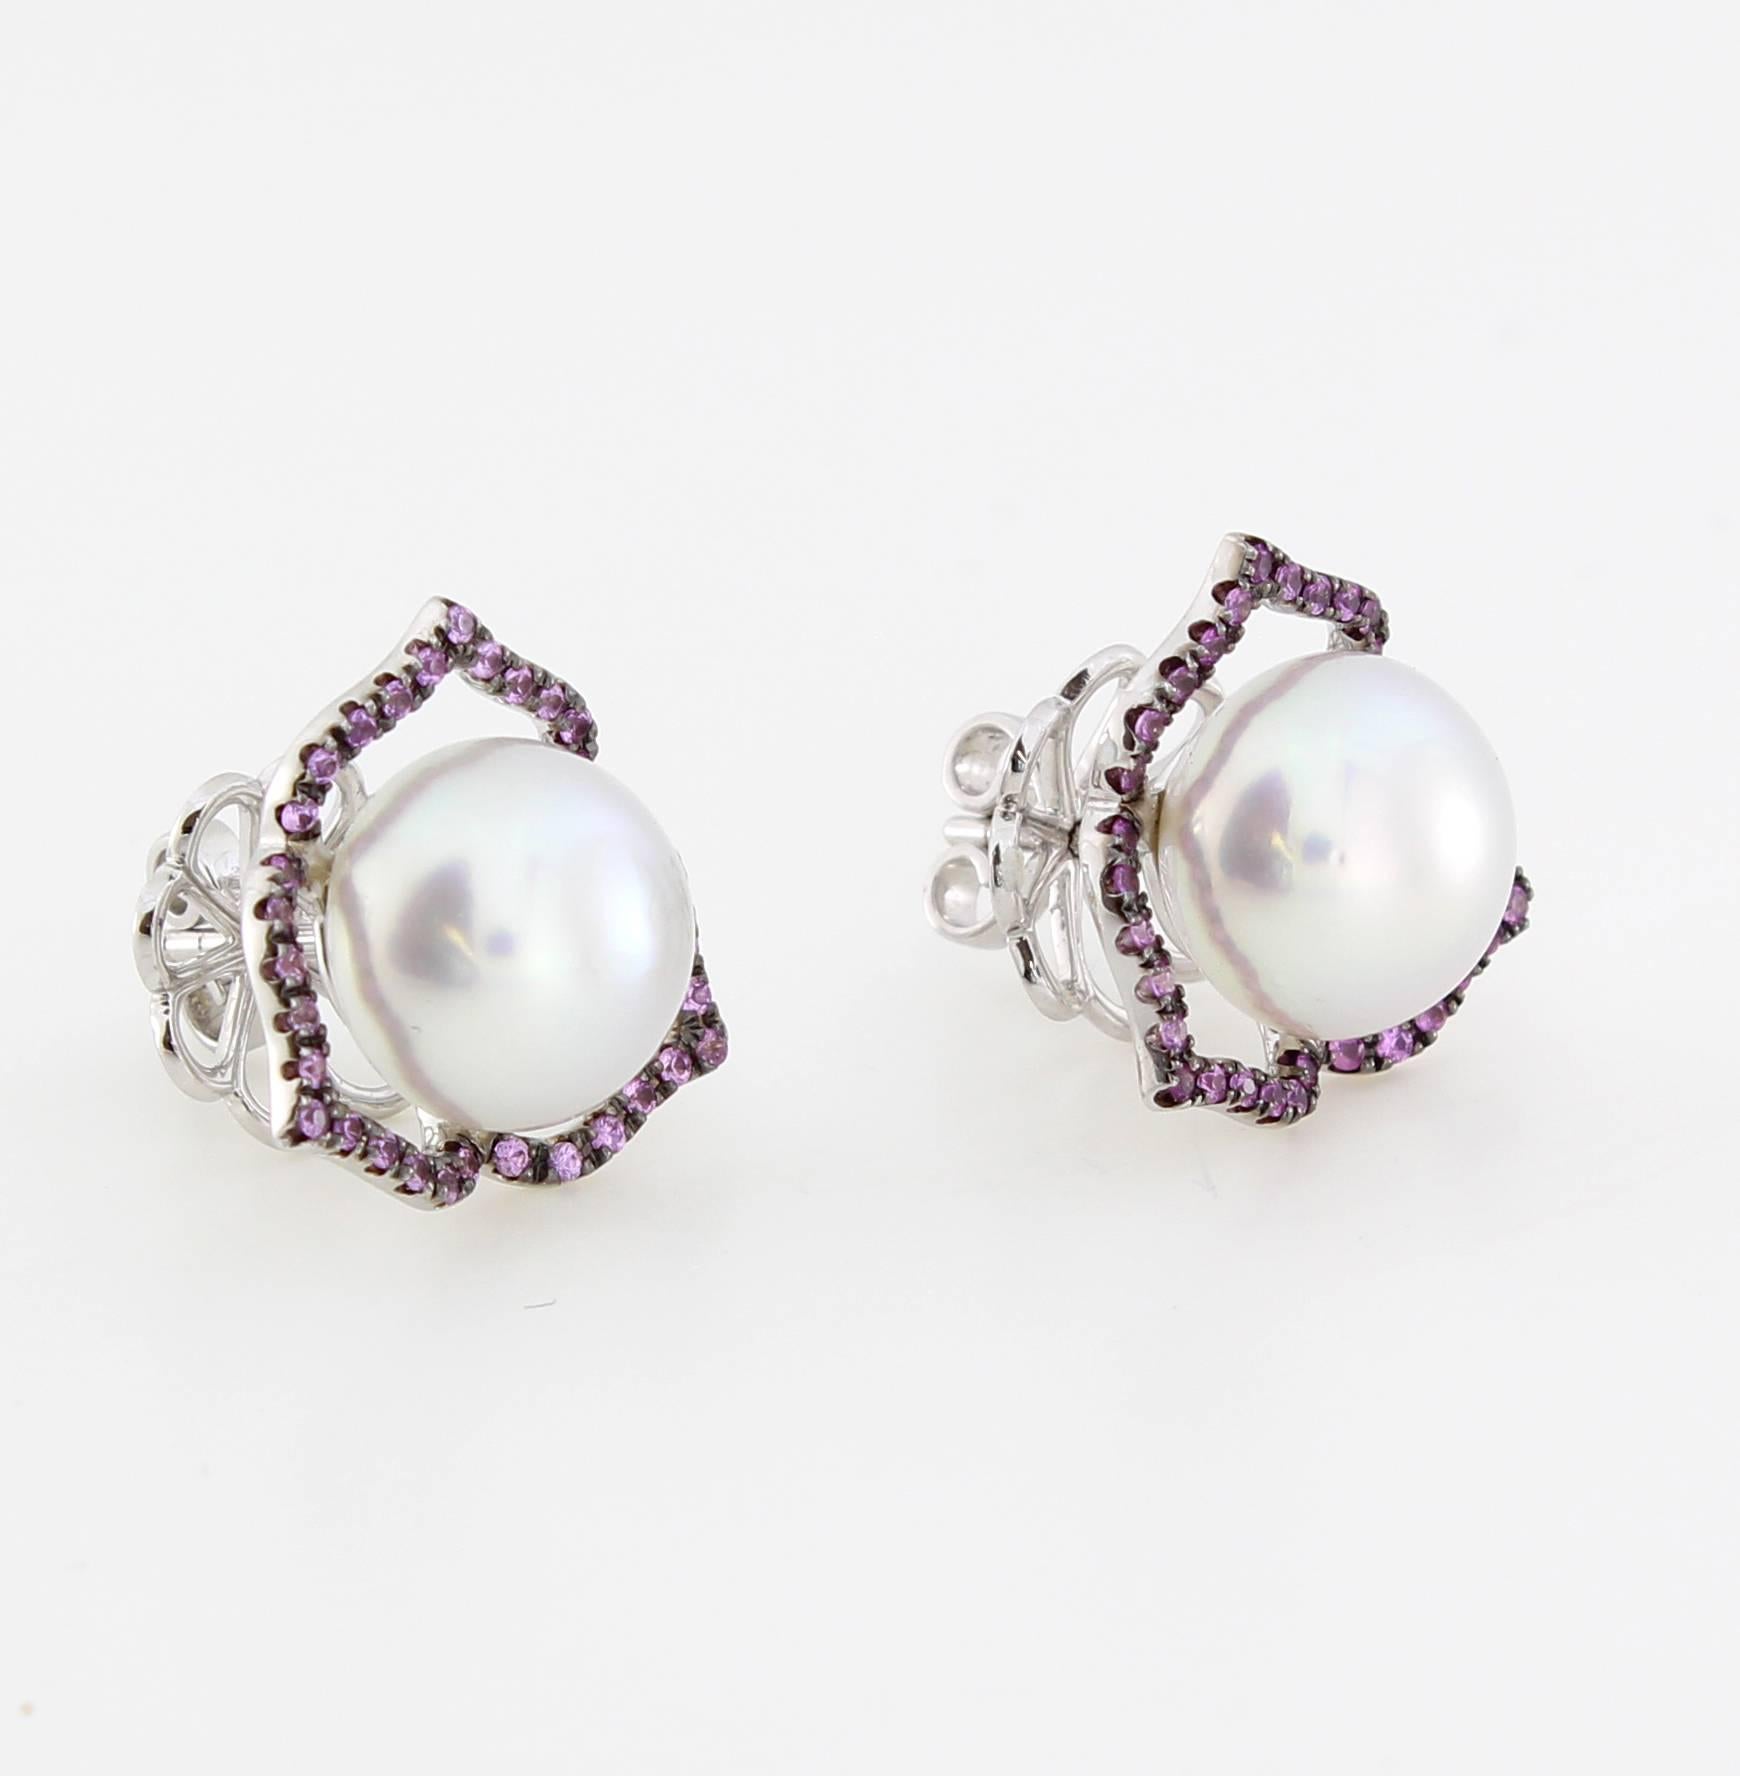 The 3 Point Stud Earrings are from the AUTORE Timeless Collection.
This piece is crafted in 18k White Gold with Pink Sapphires (0.432ct Brilliant Cut) with 11mm High Button White South Sea Pearls. 